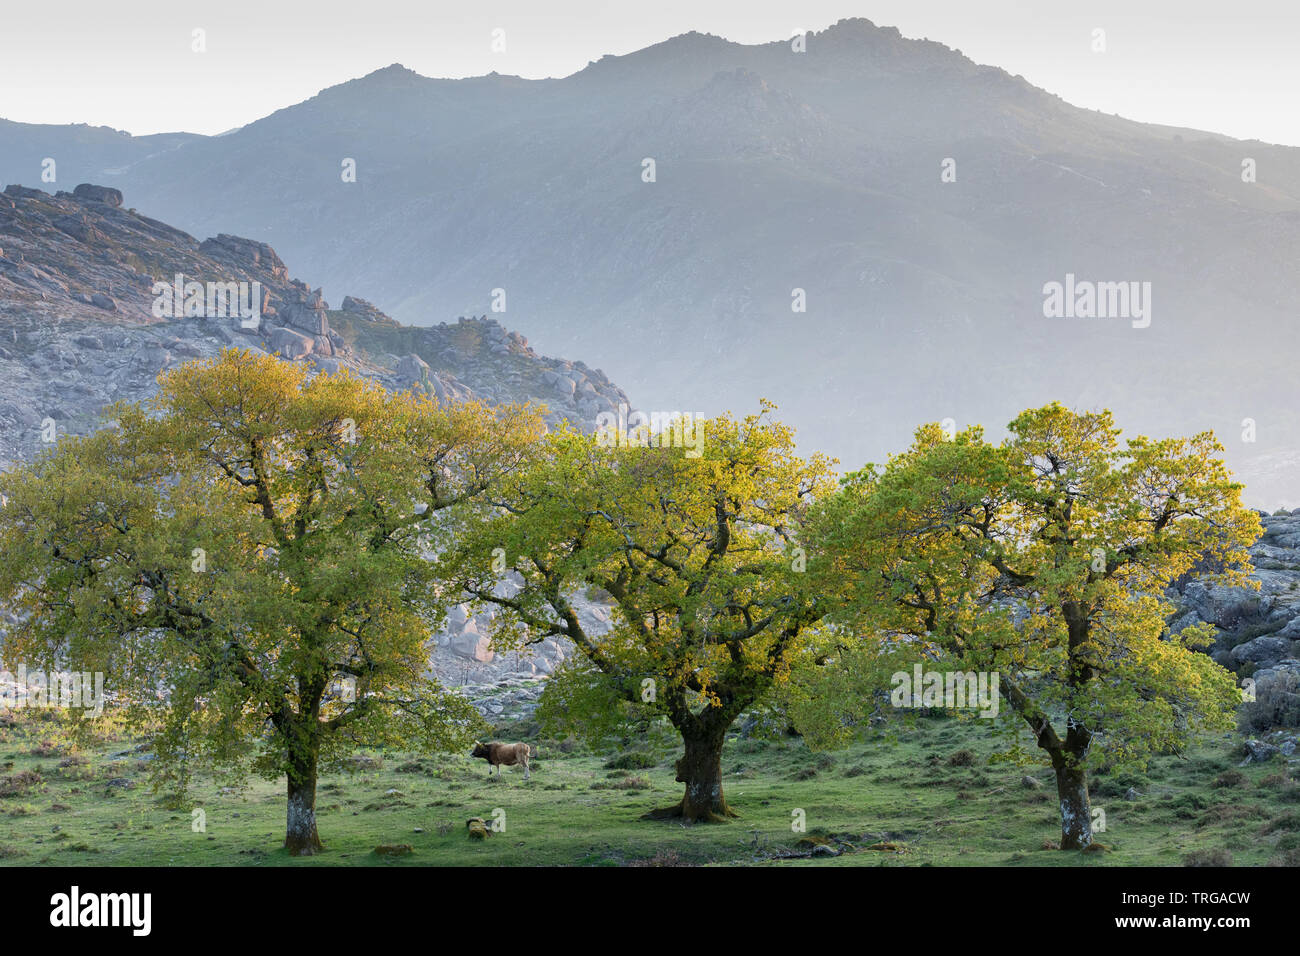 Cattle and trees catching the last light of day on the slopes of Lamas, Peneda-Gerês National Park, Braga, Portugal Stock Photo